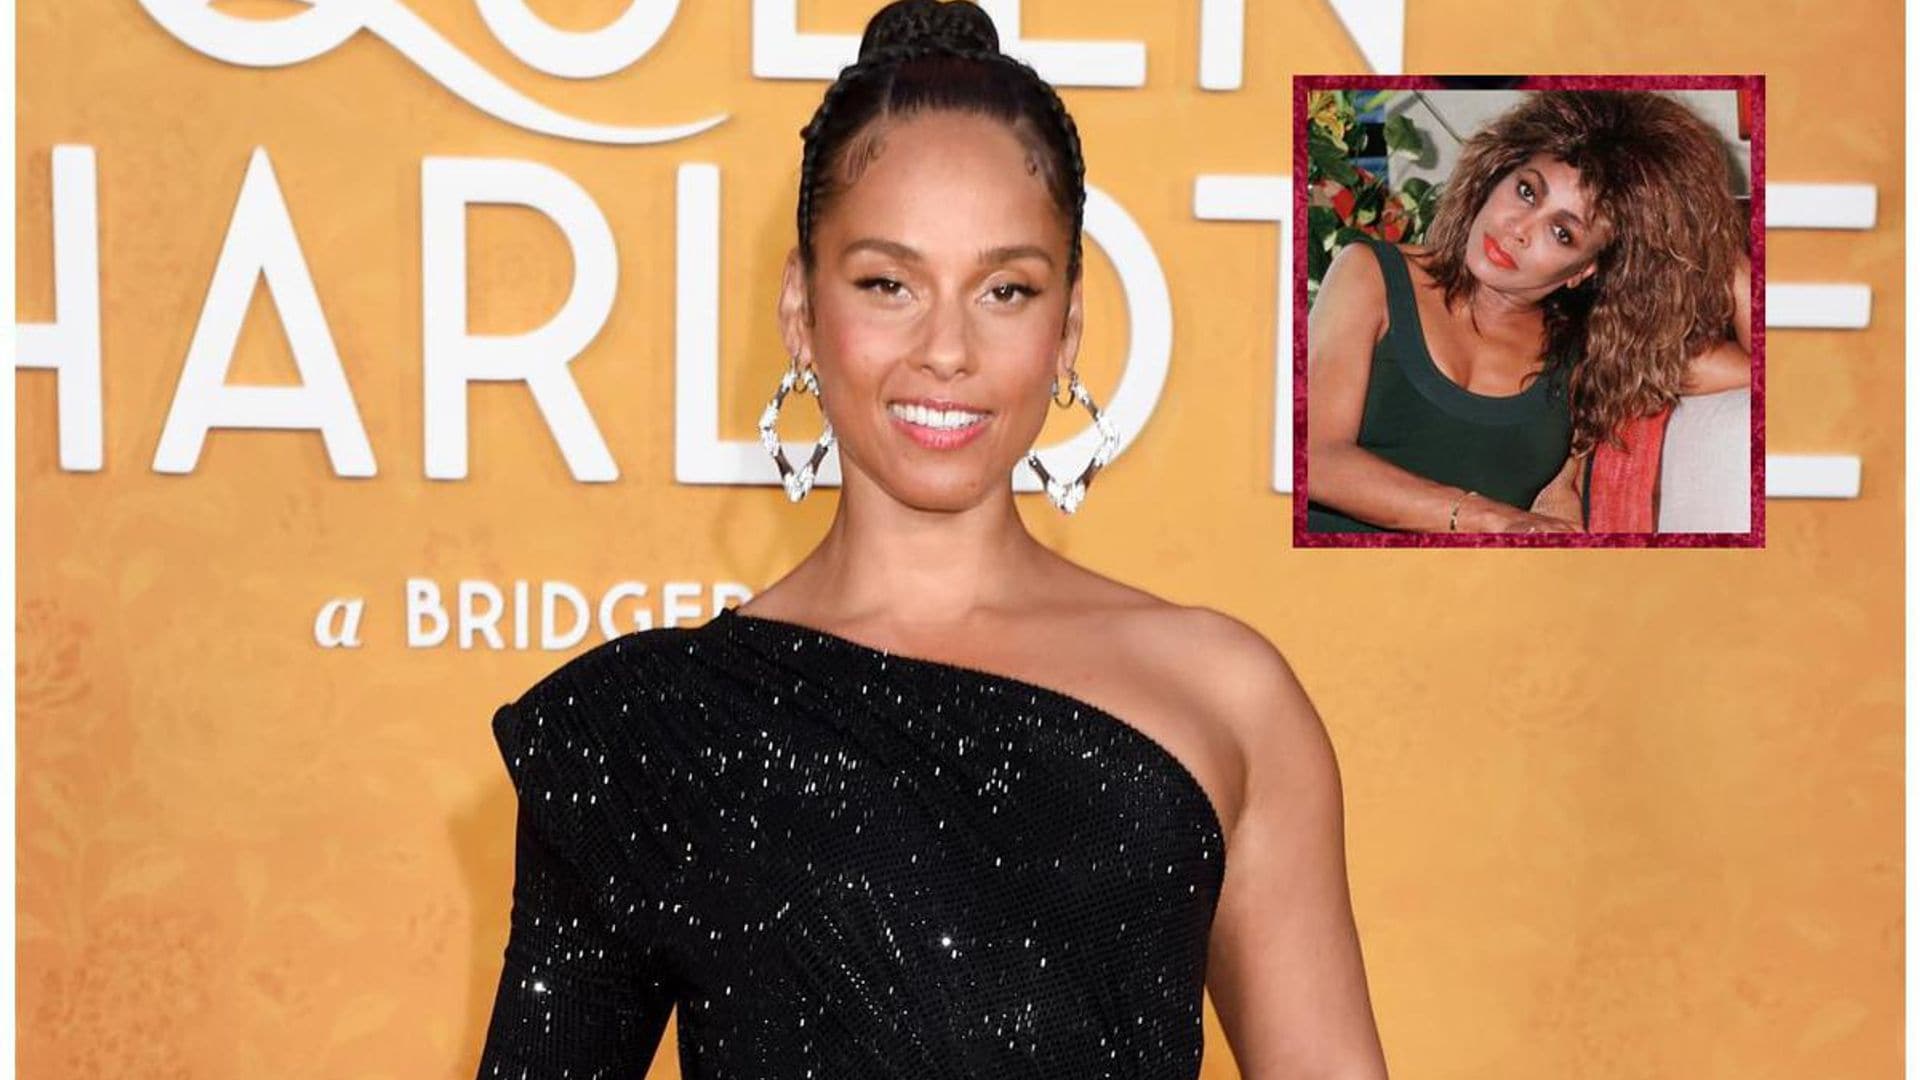 Alicia Keys pays homage to Tina Turner in a moving tribute